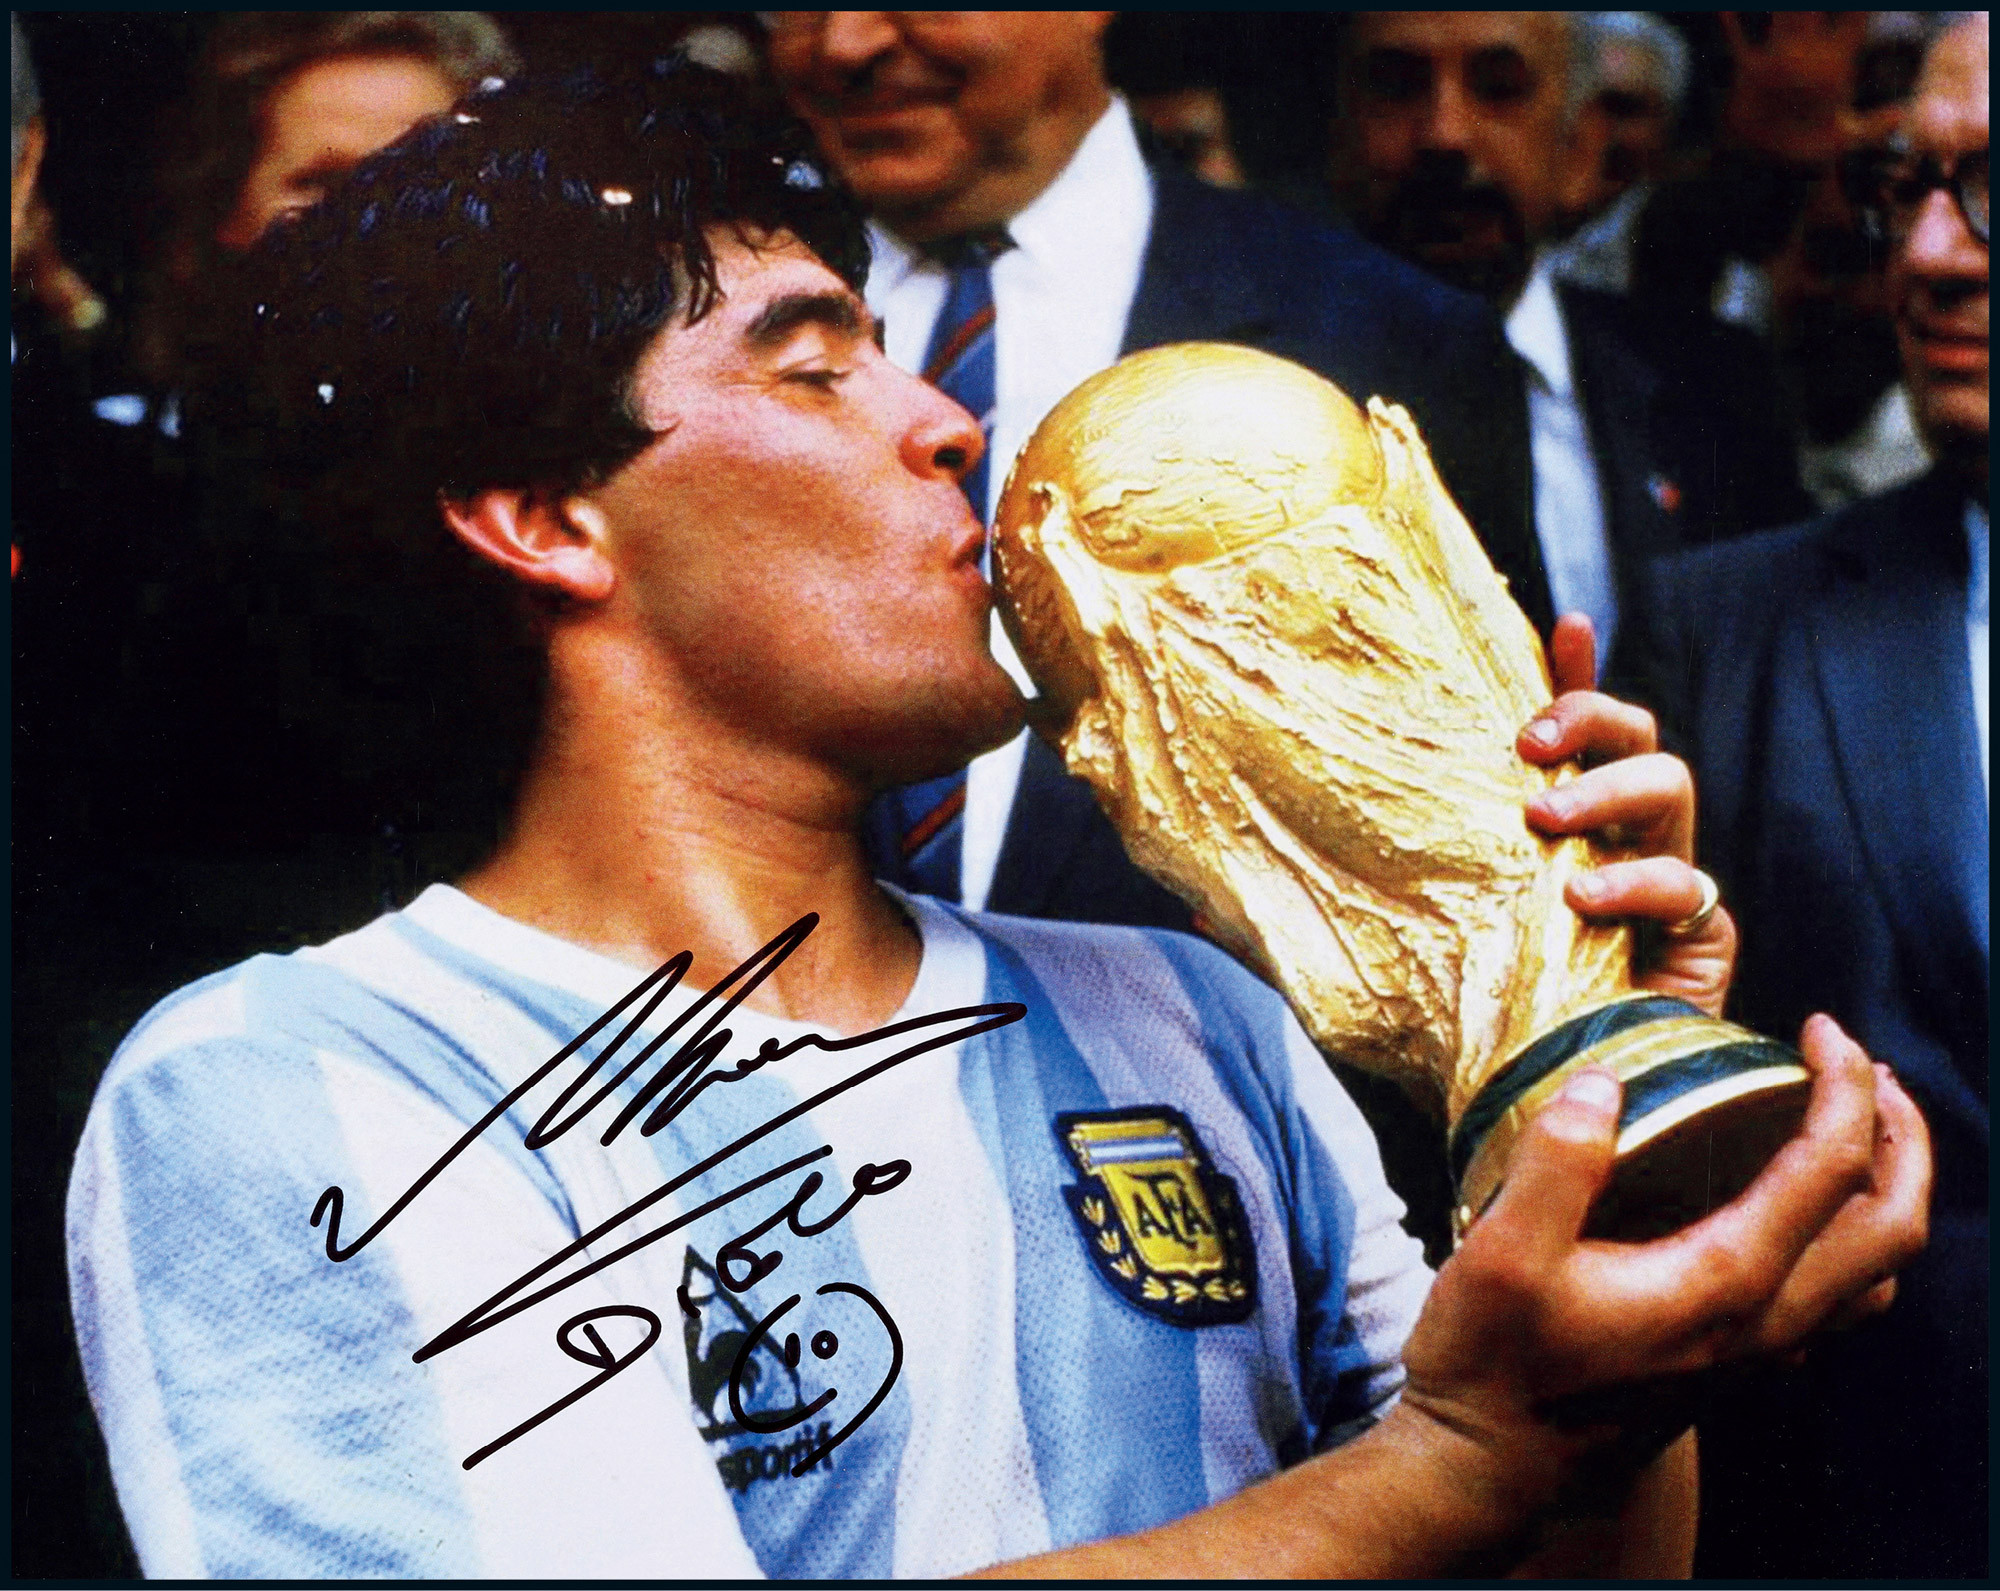 The autographed photo of Diego Maradona, “Argentinan king of football”, with certificate